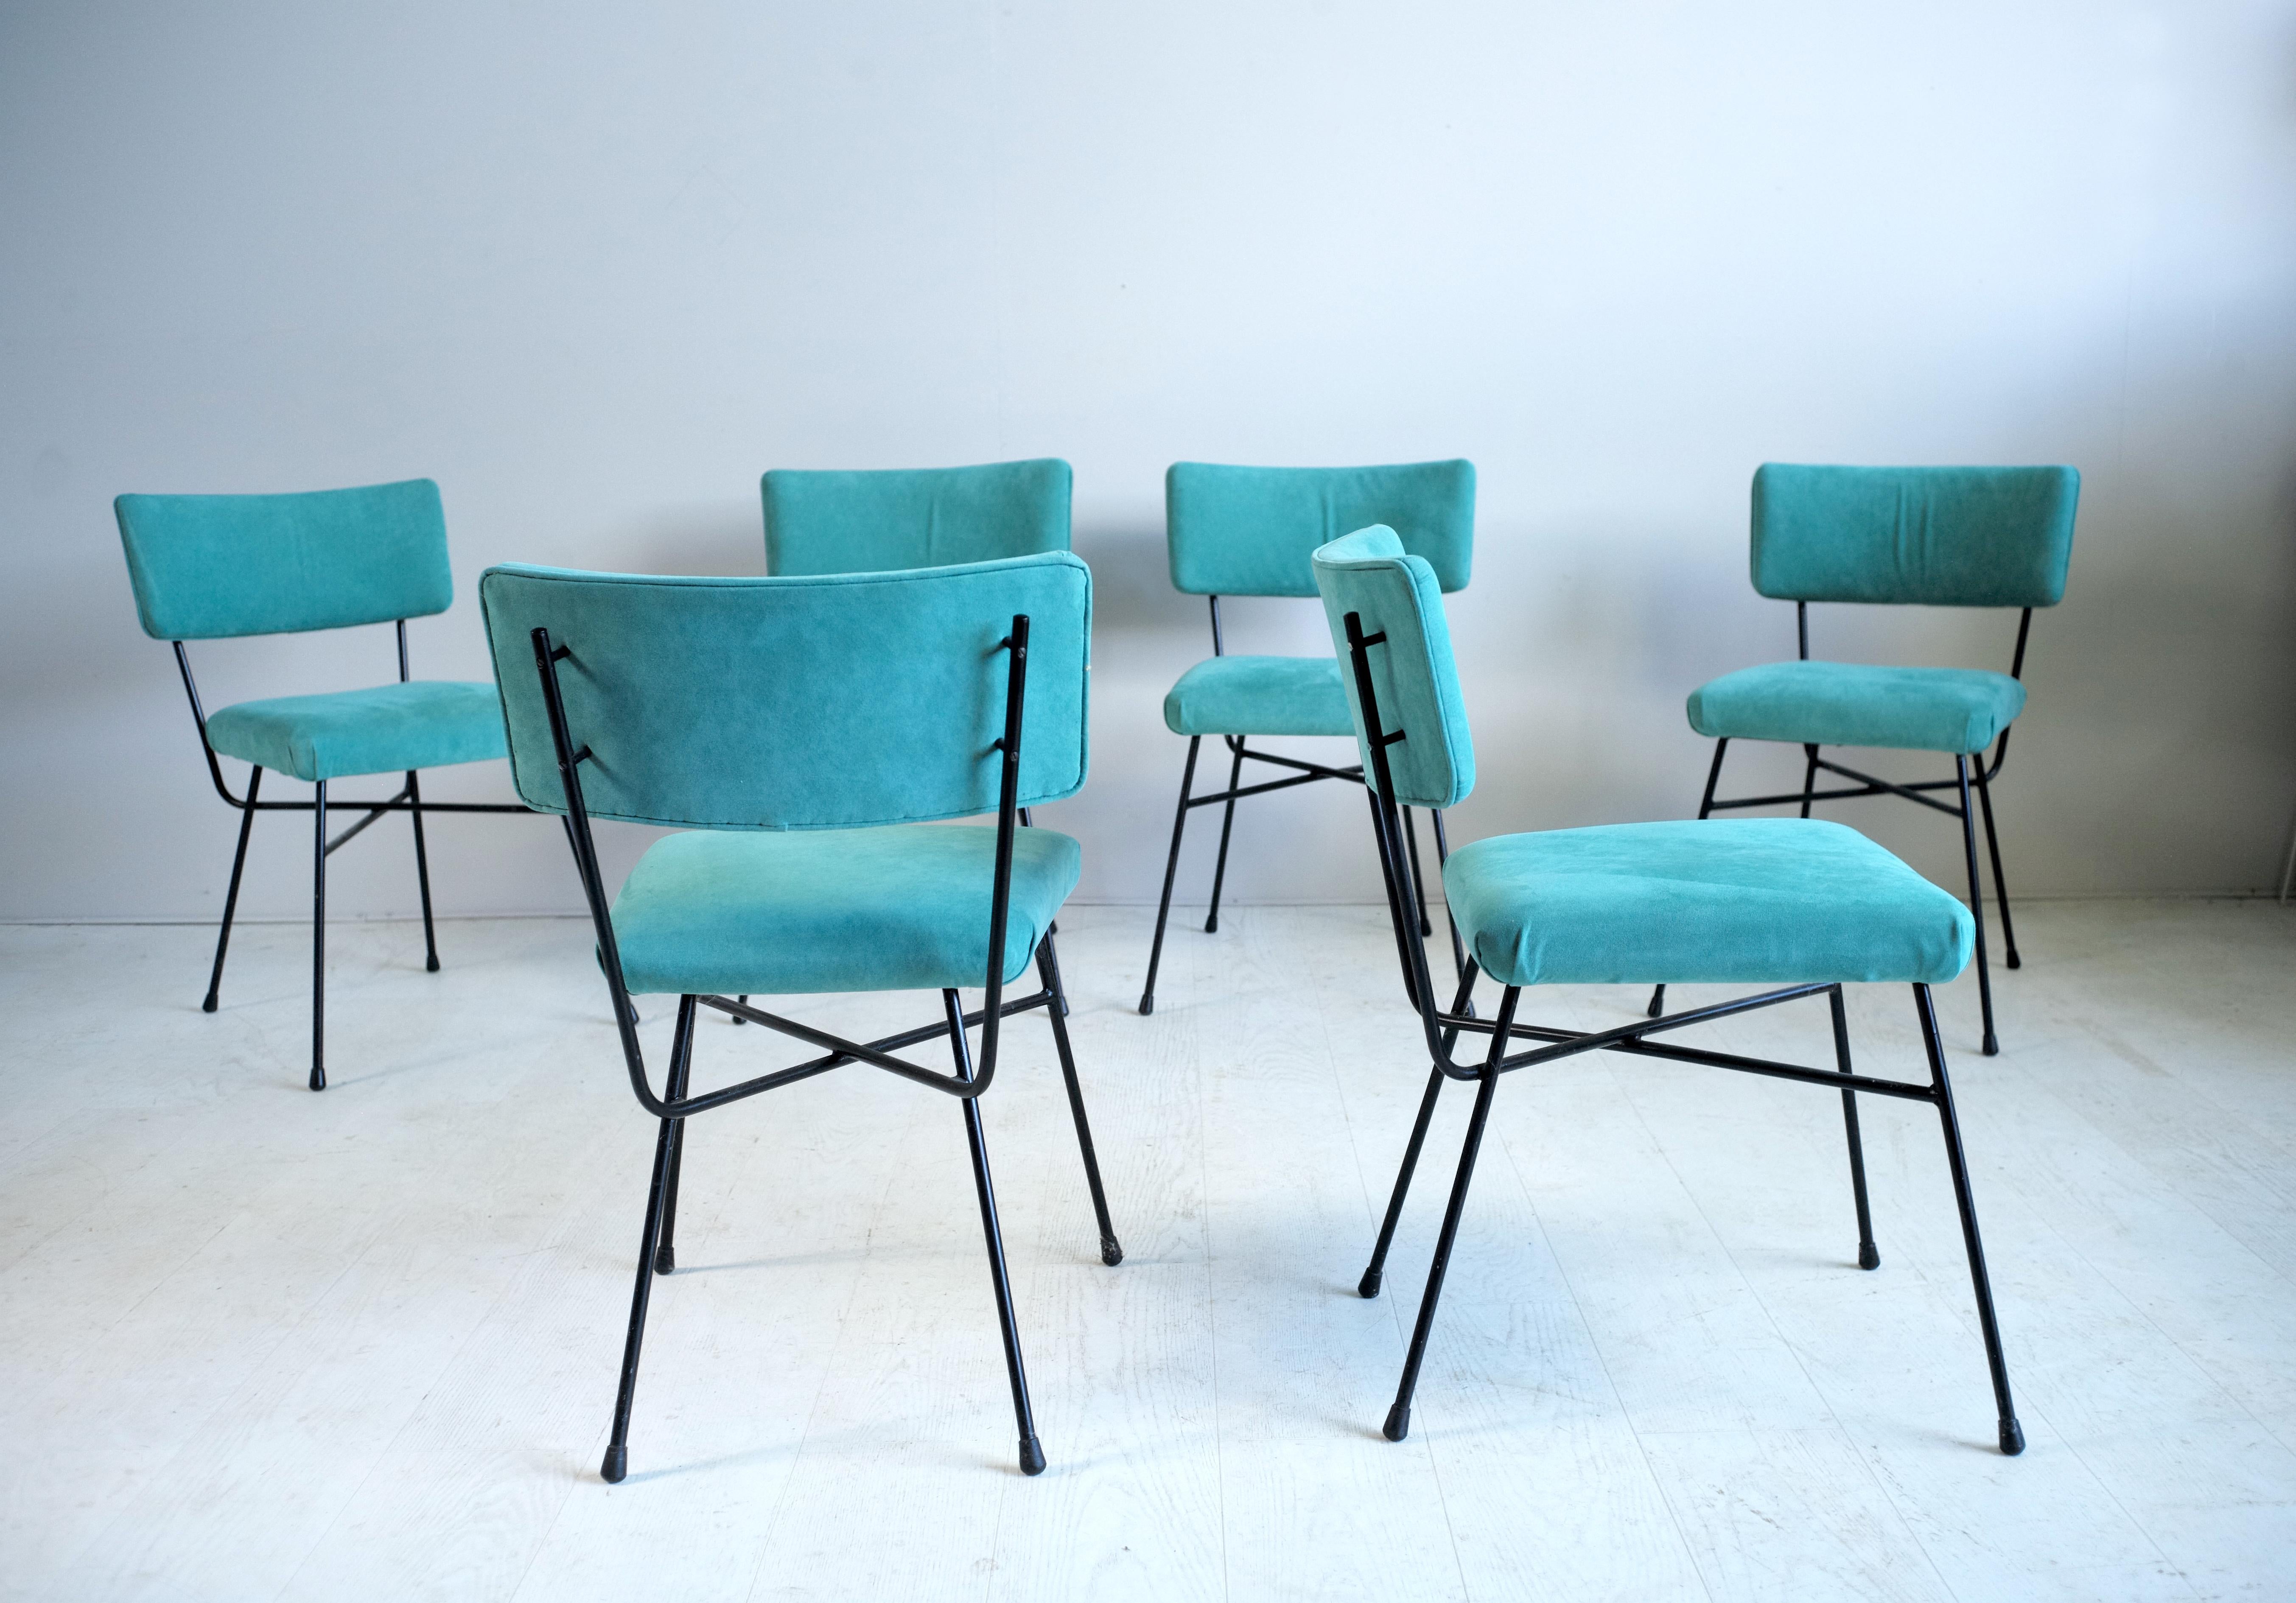 Series of 6 Elettra chairs created by Studio BBPR, produced by Arflex, Italy 1954. Structure in black lacquered tubular metal, seat and back covered with blue or almond green Alcantara. The Italian studio BBPR was formed in 1932 by the architects,